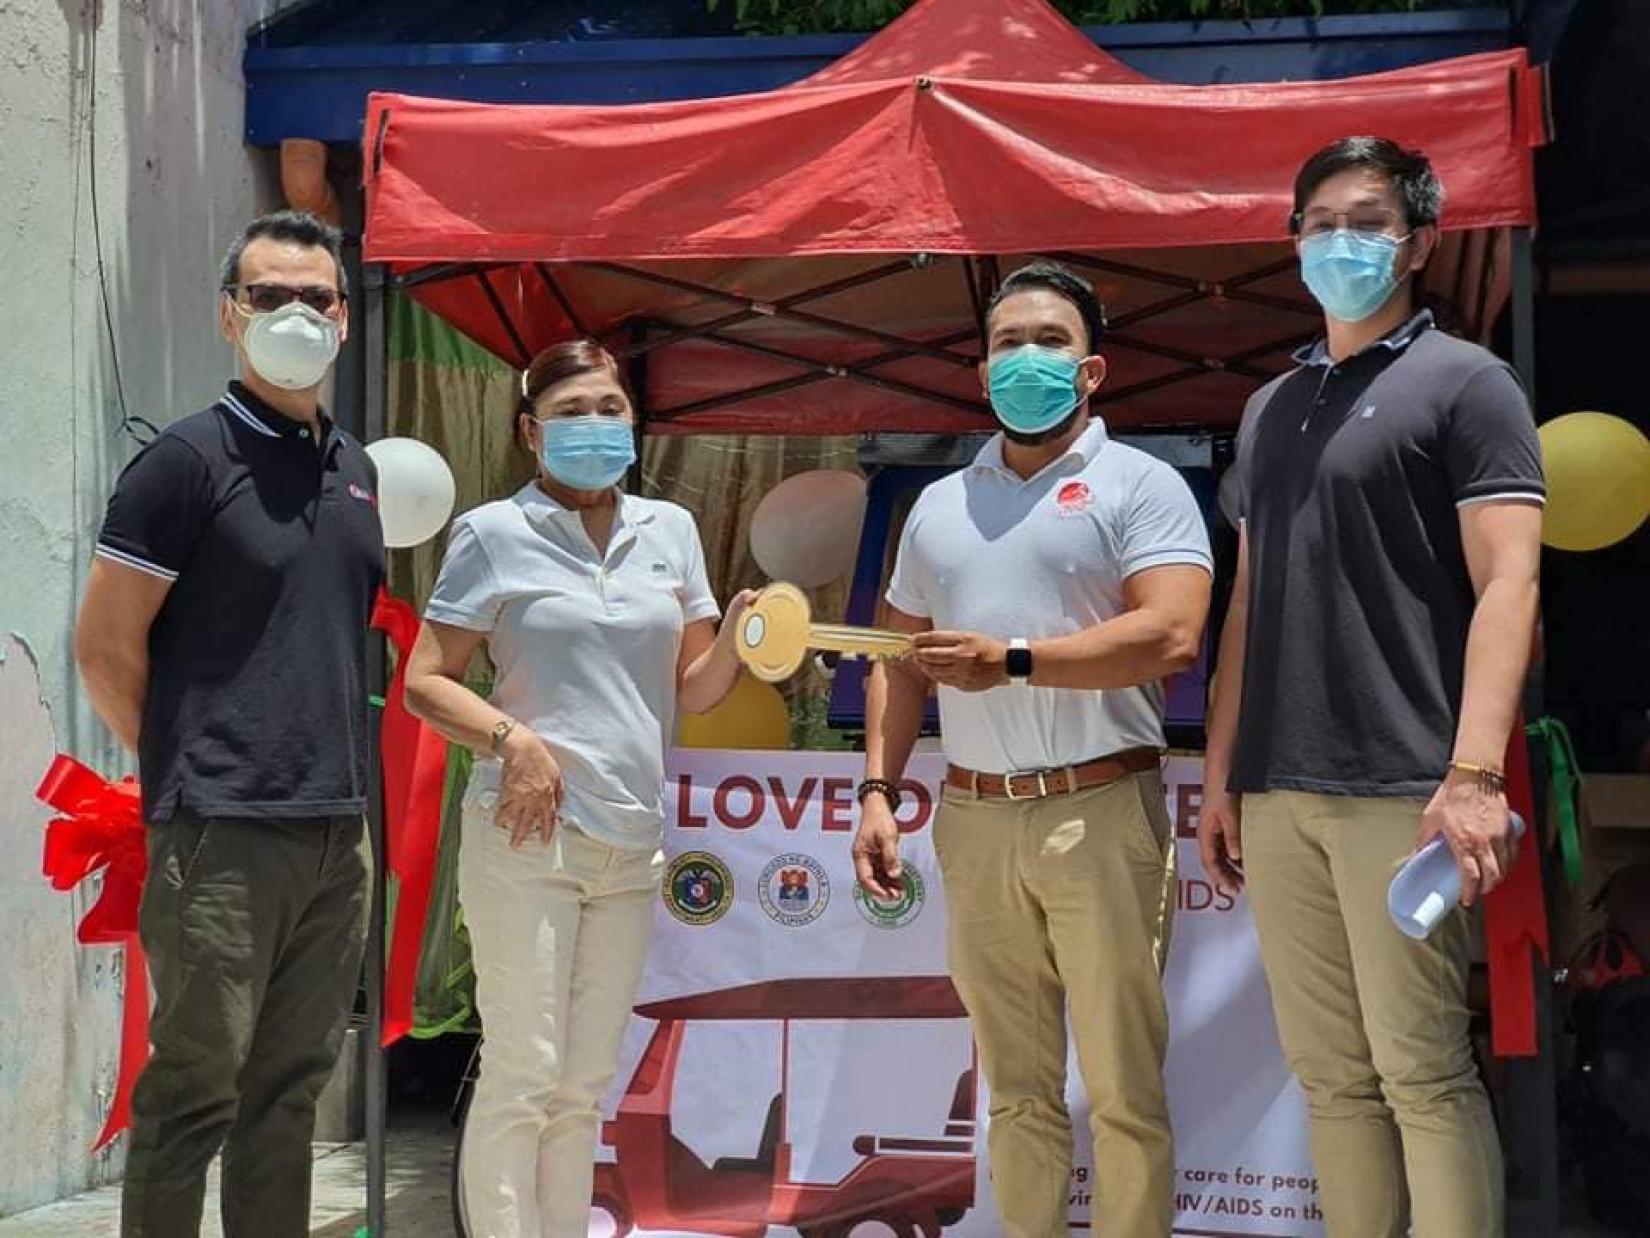 UNAIDS and partners launch Love on Wheels project